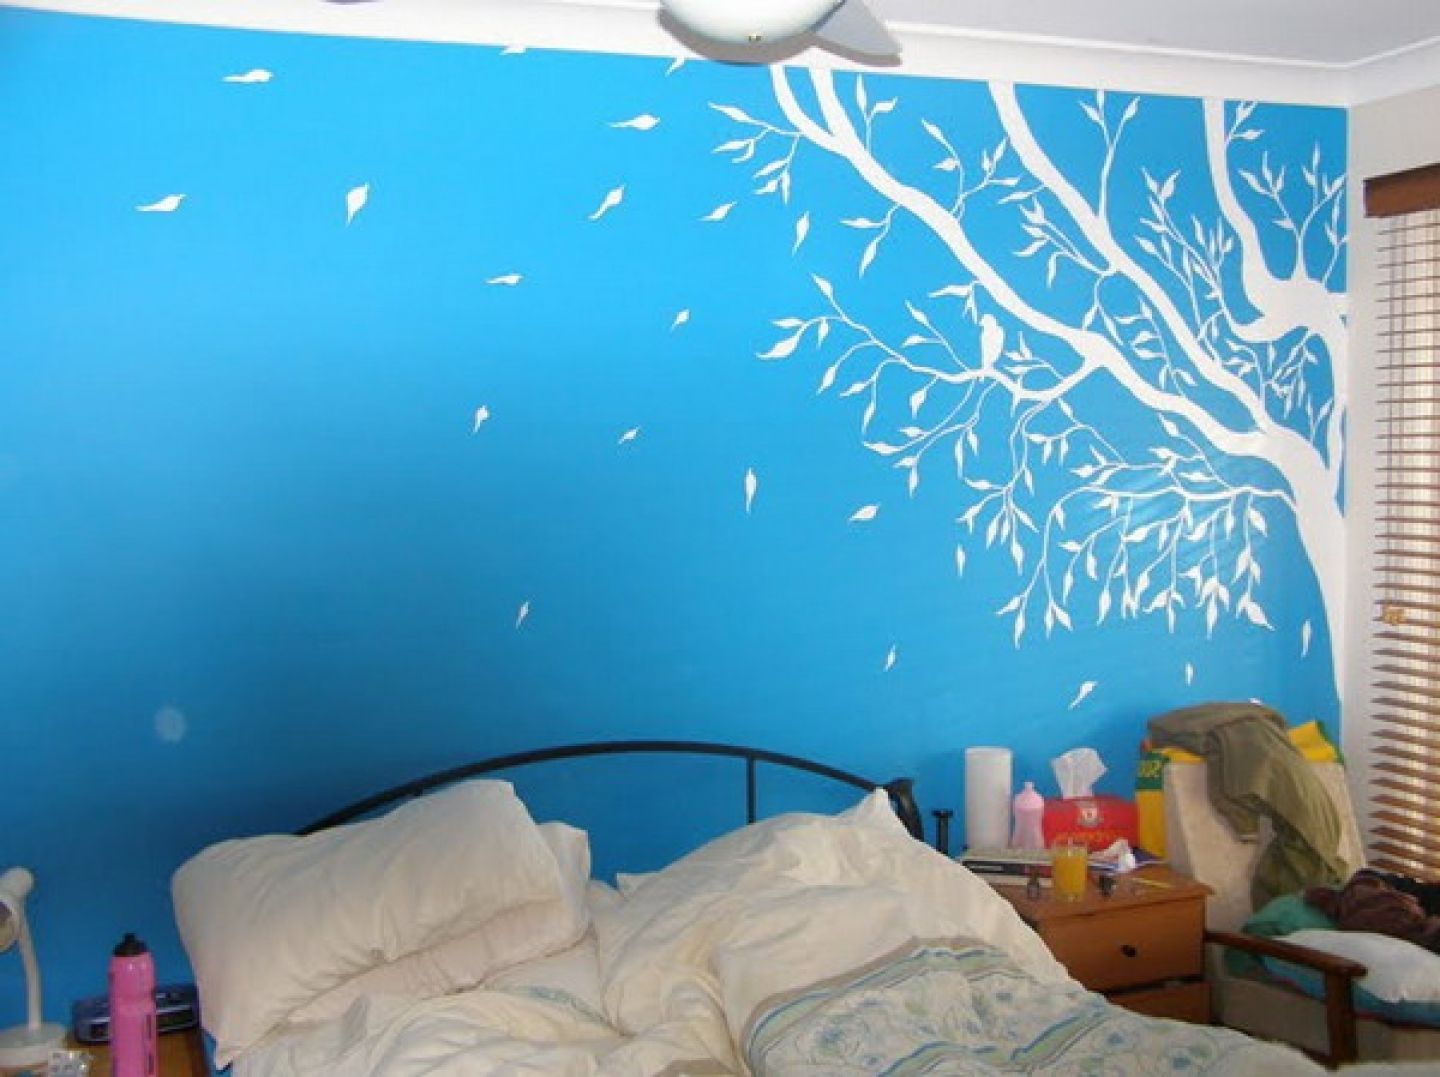 Blue And White Wall Art Within Well Liked Wall Painting Ideas Blue Schemes Bedroom Blue Walls With White (View 7 of 15)